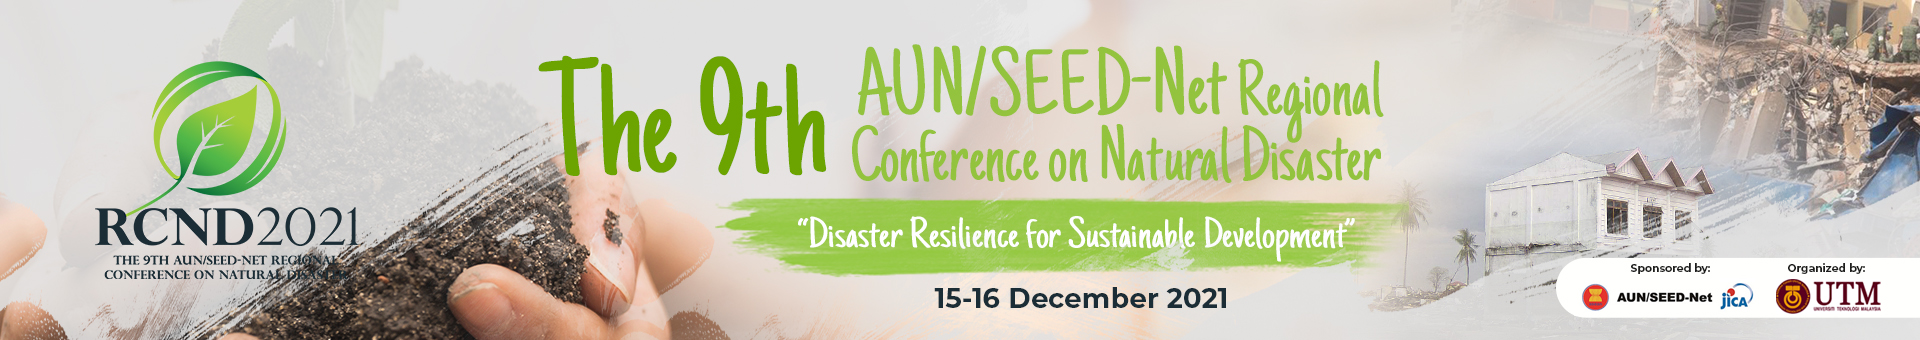 The banner to welcome you to The 9th AUN/SEED-Net Regional Conference on Natural Disaster